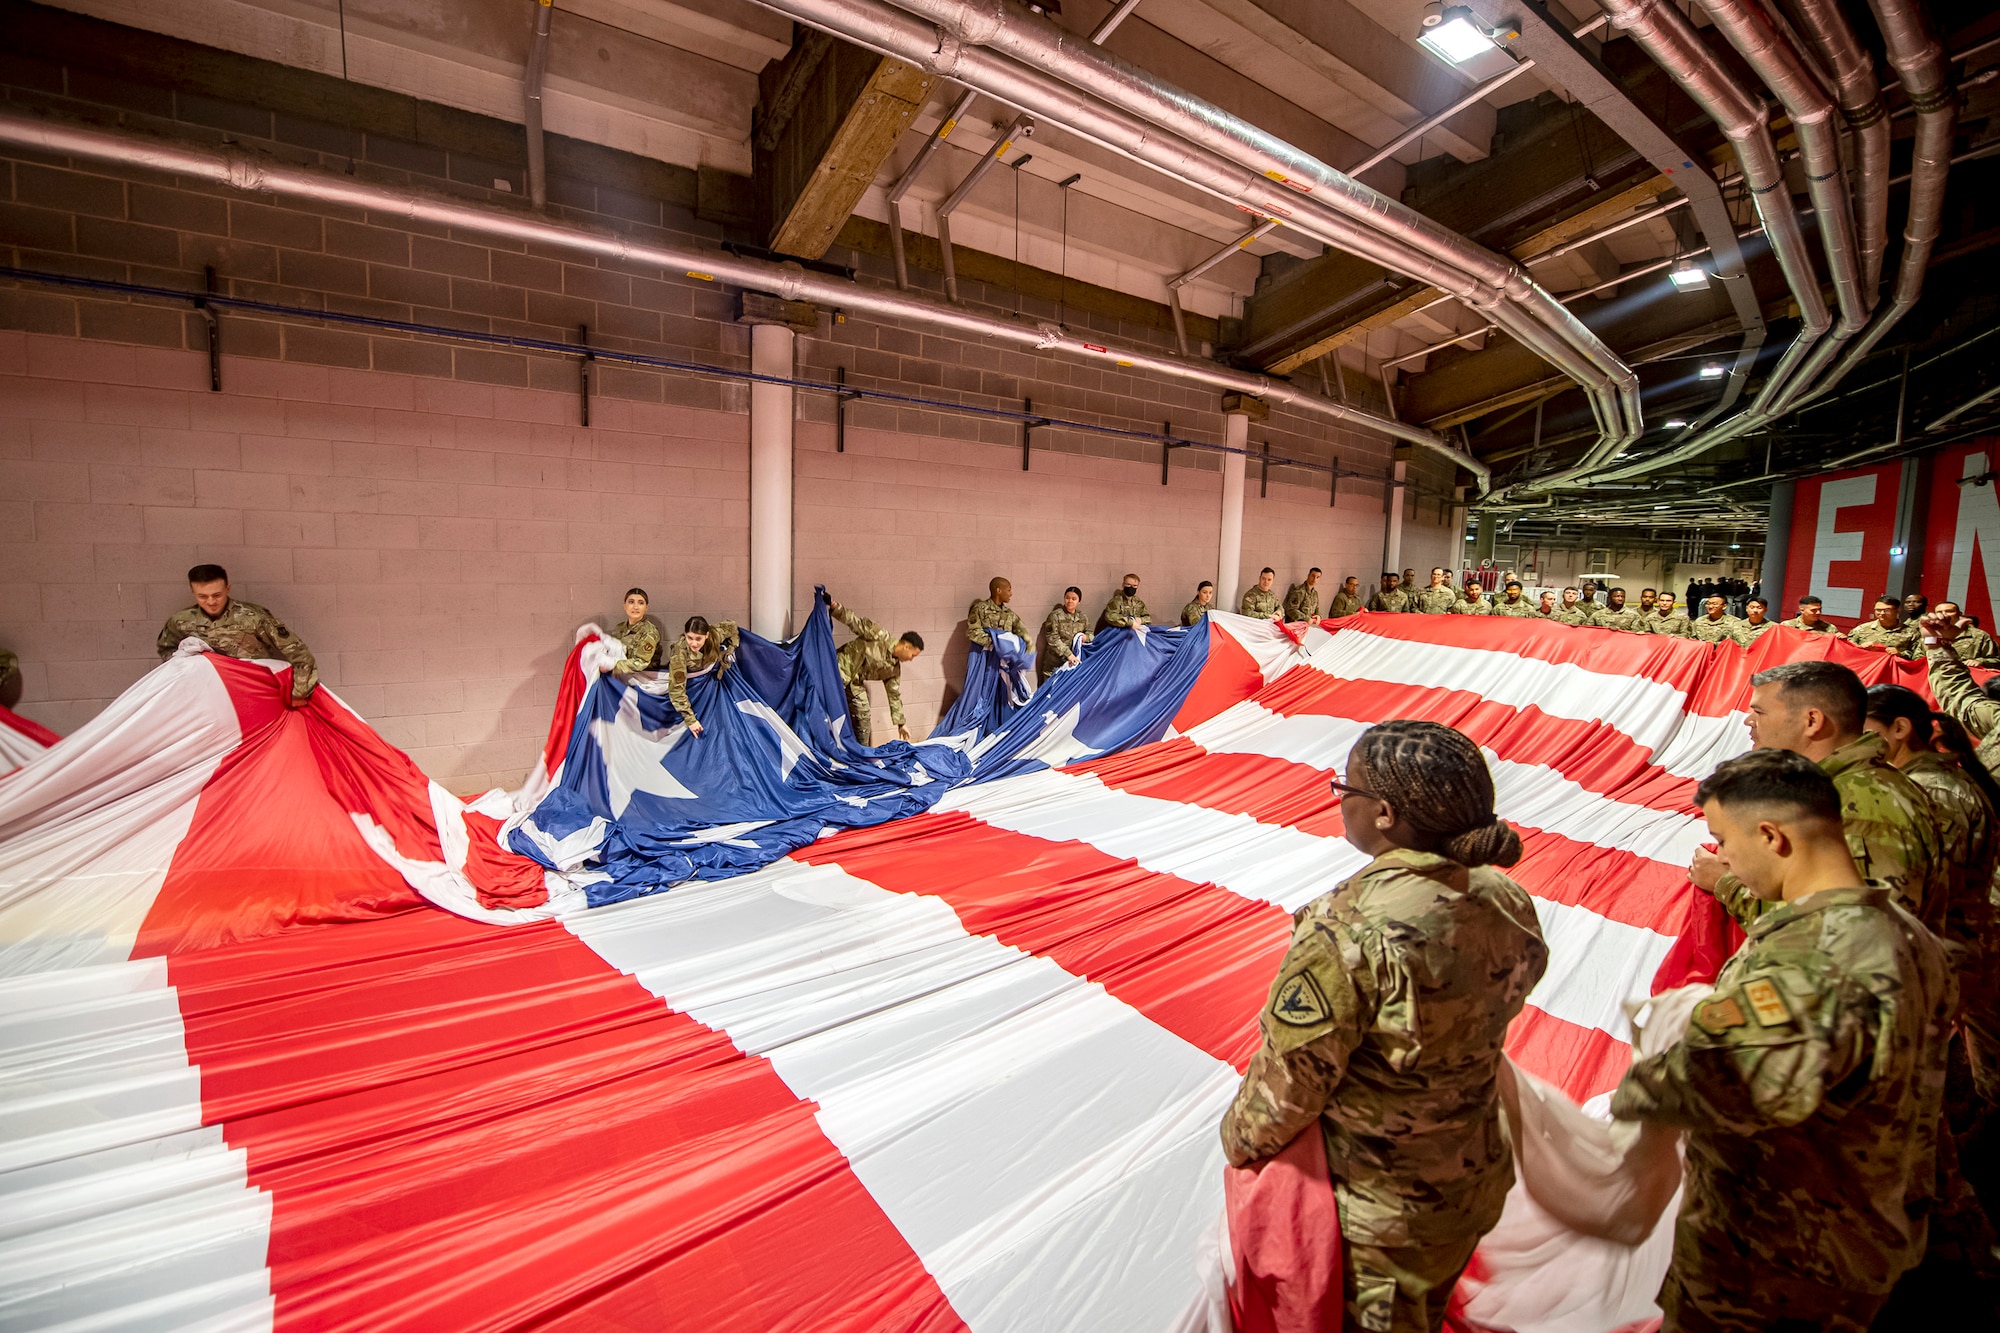 Airmen from the 501st Combat Support Wing, fold an American flag prior to a national anthem demonstration at Wembley Stadium, in London, England, Oct. 30, 2022. Approximately 70 uniformed personnel represented the U.S. Air Force and nation by unveiling an American flag during the pre-game ceremonies of the Jacksonville Jaguars and Denver Broncos NFL game. (U.S. Air Force photo by Staff Sgt. Eugene Oliver)